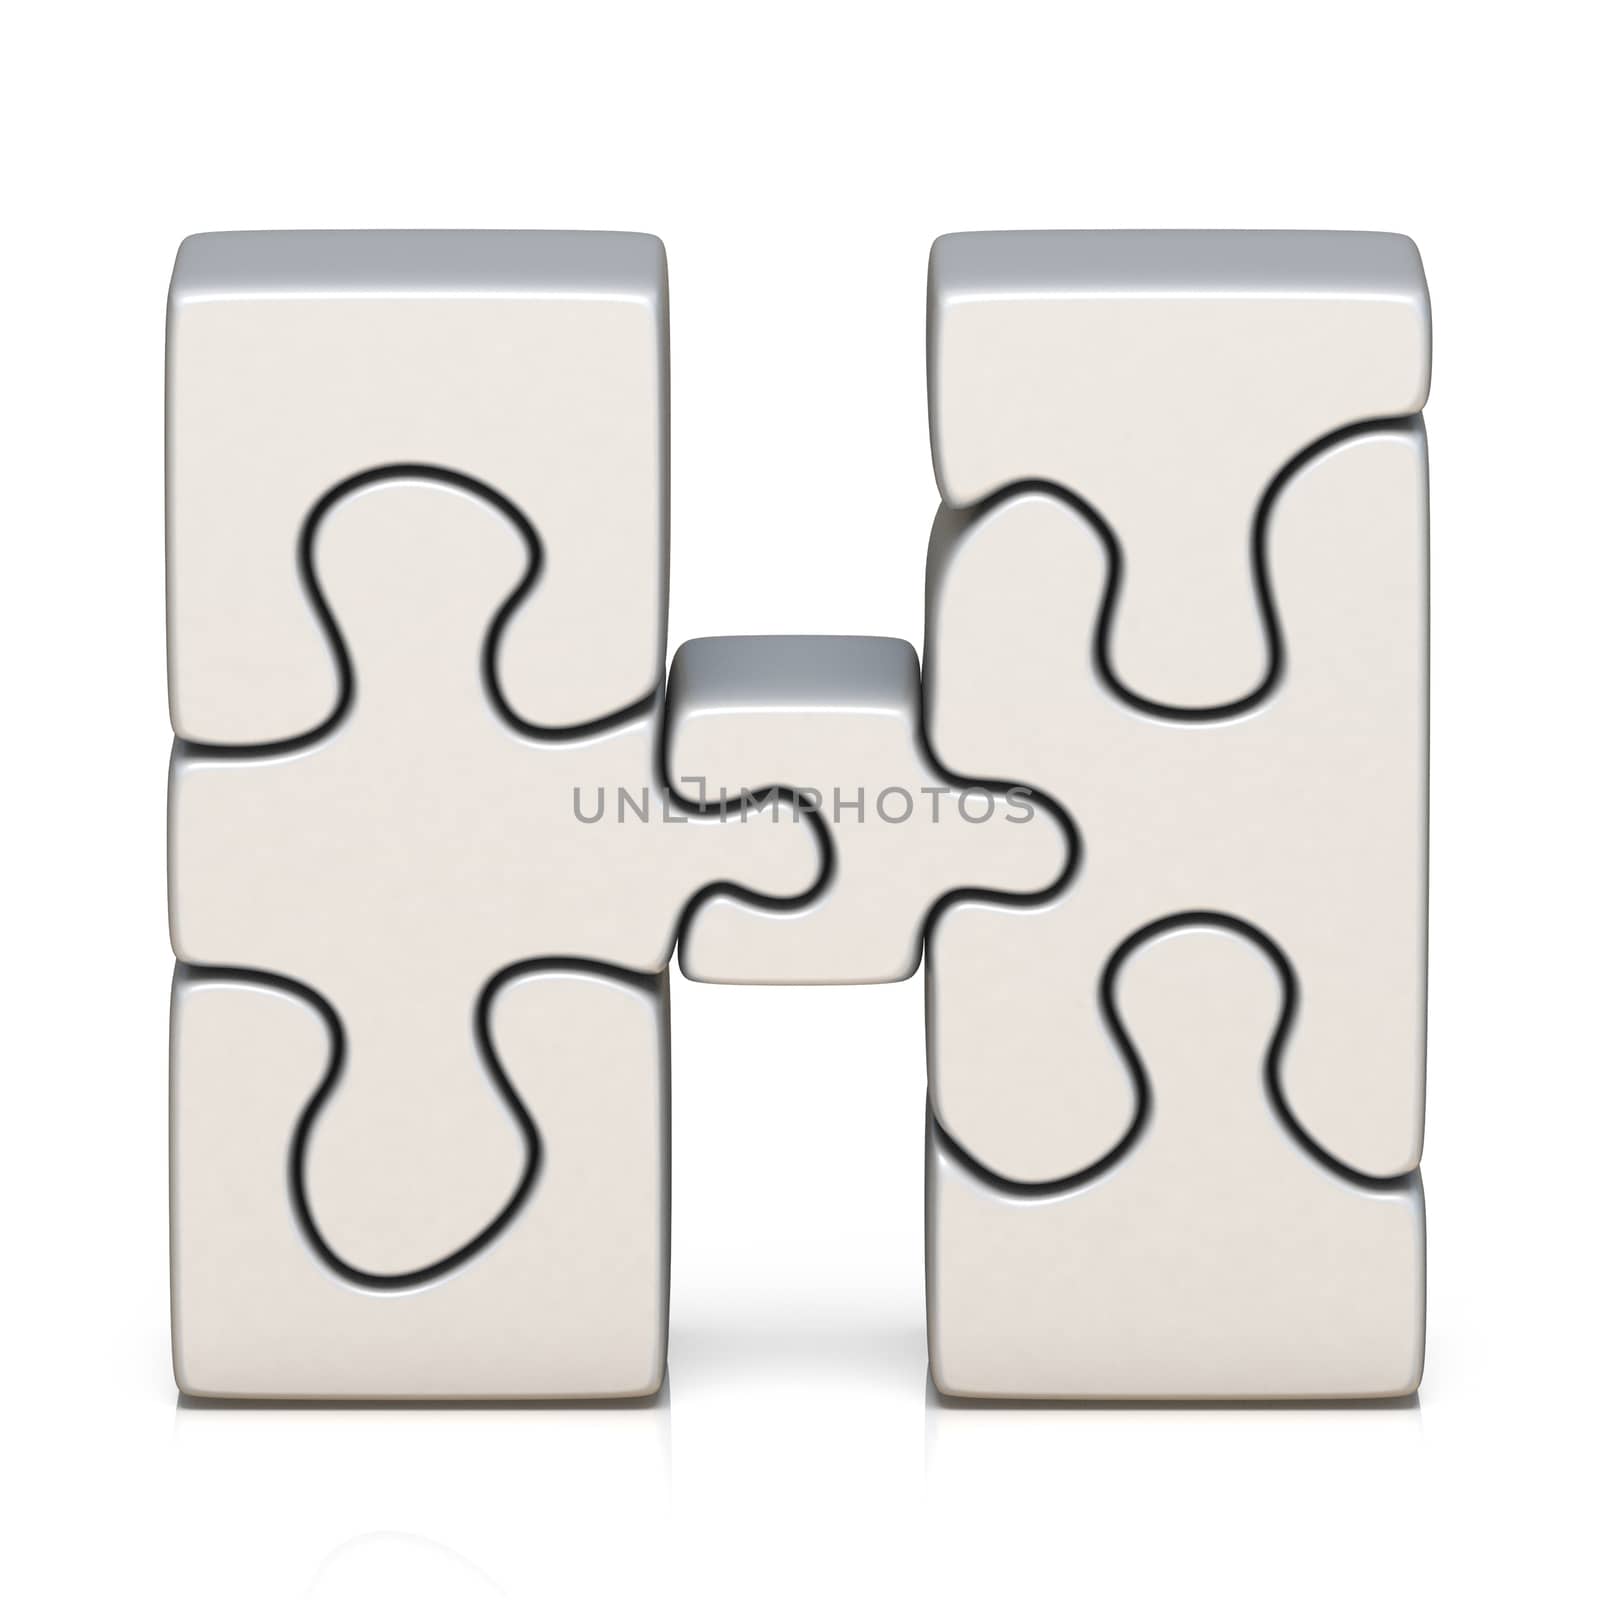 White puzzle jigsaw letter H 3D render illustration isolated on white background